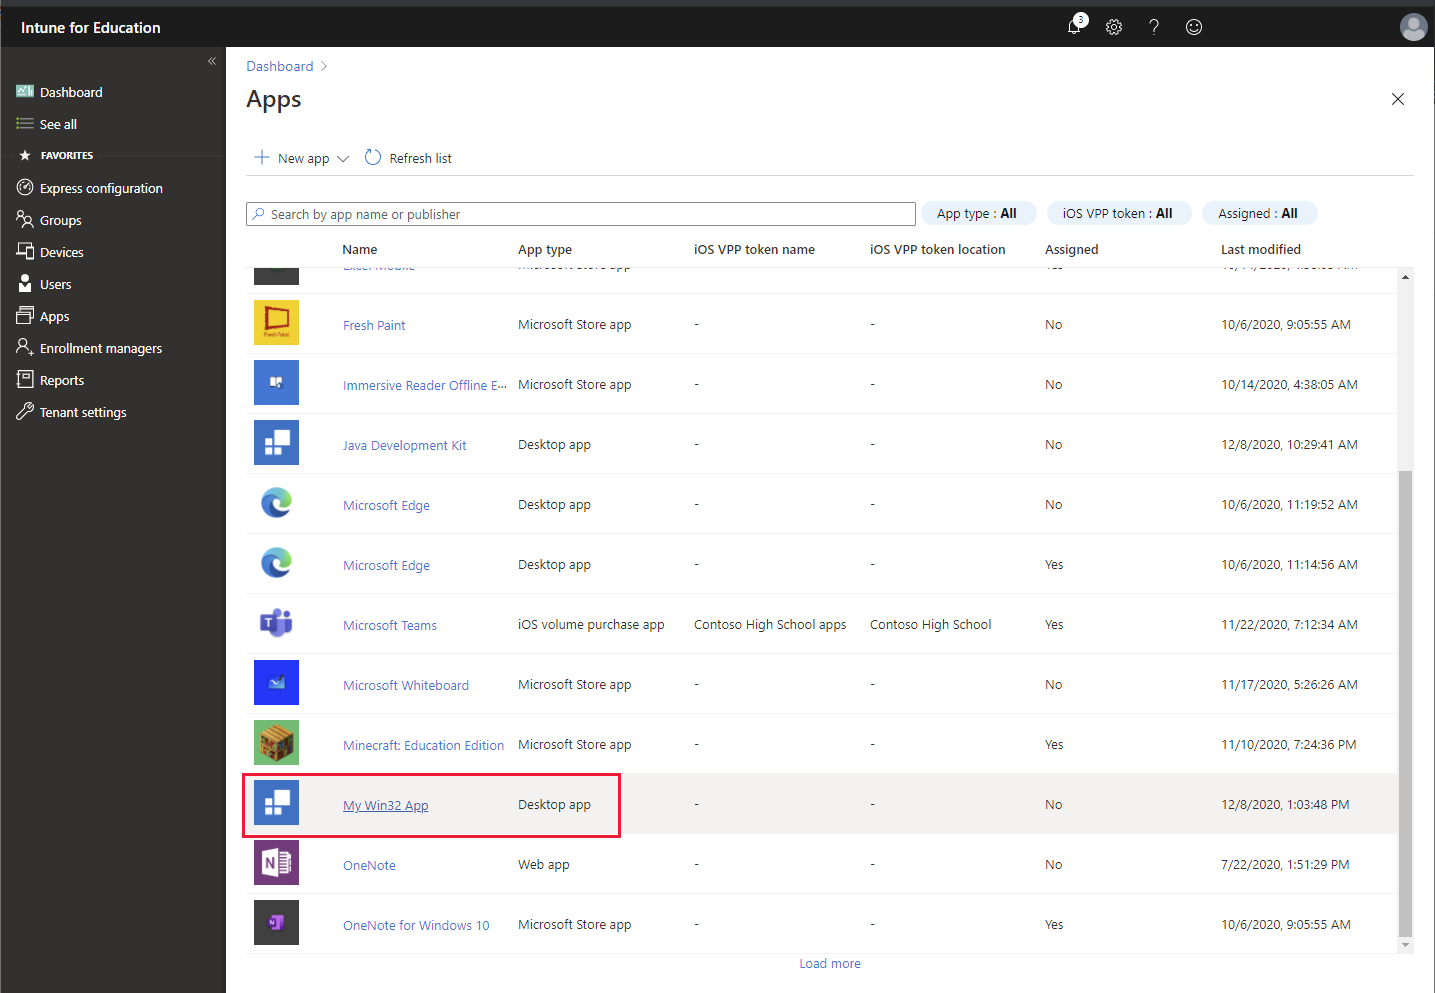 Screenshot of using Apps in Intune for Education.